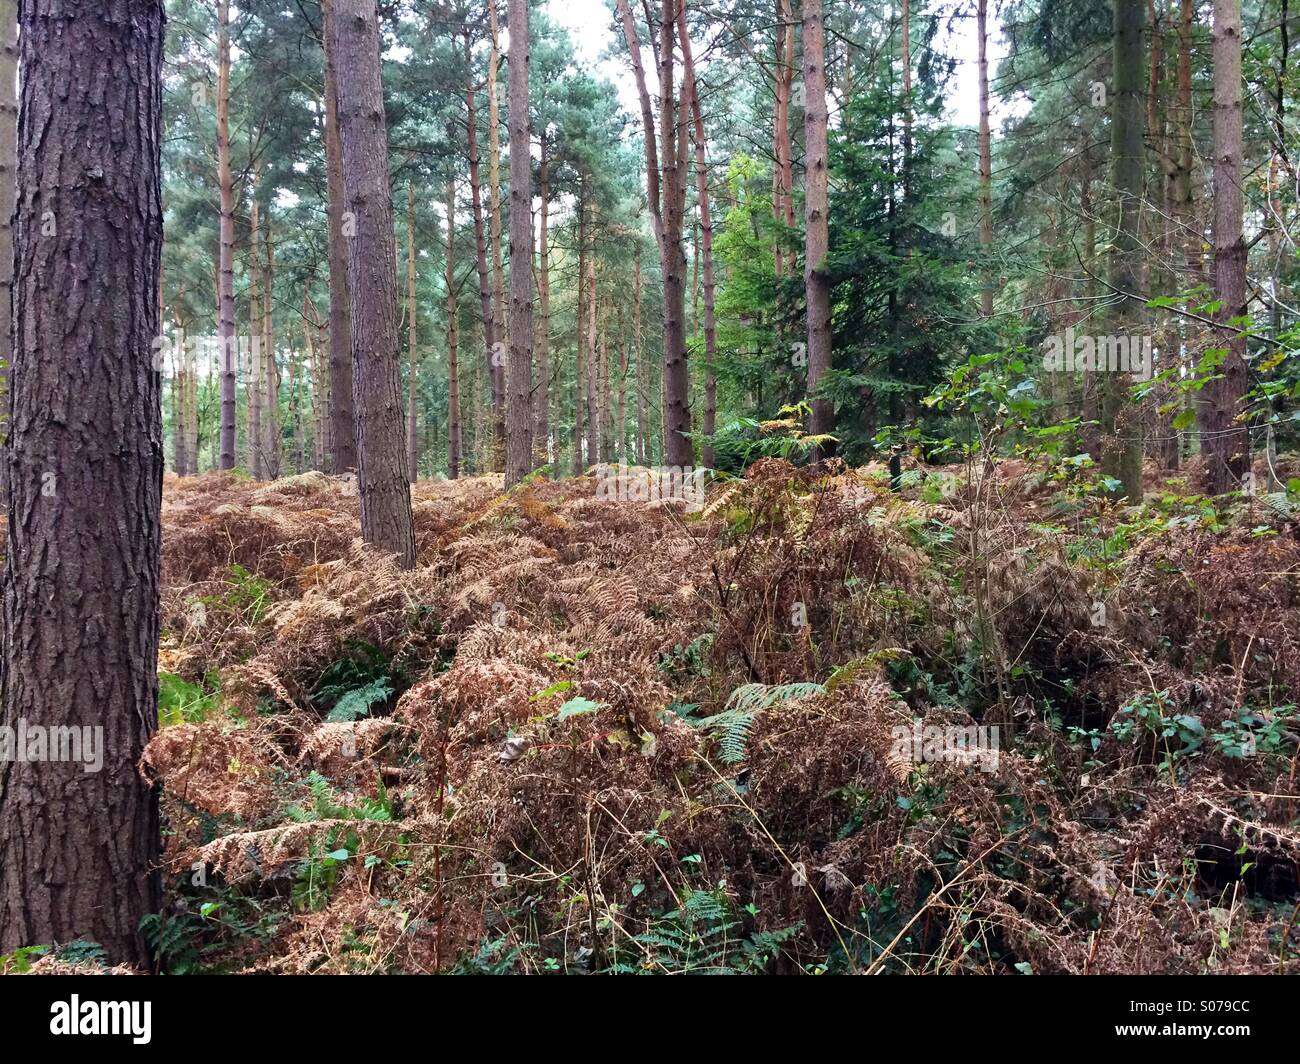 Woodland trees with a carpet of bracken ferns. Stock Photo